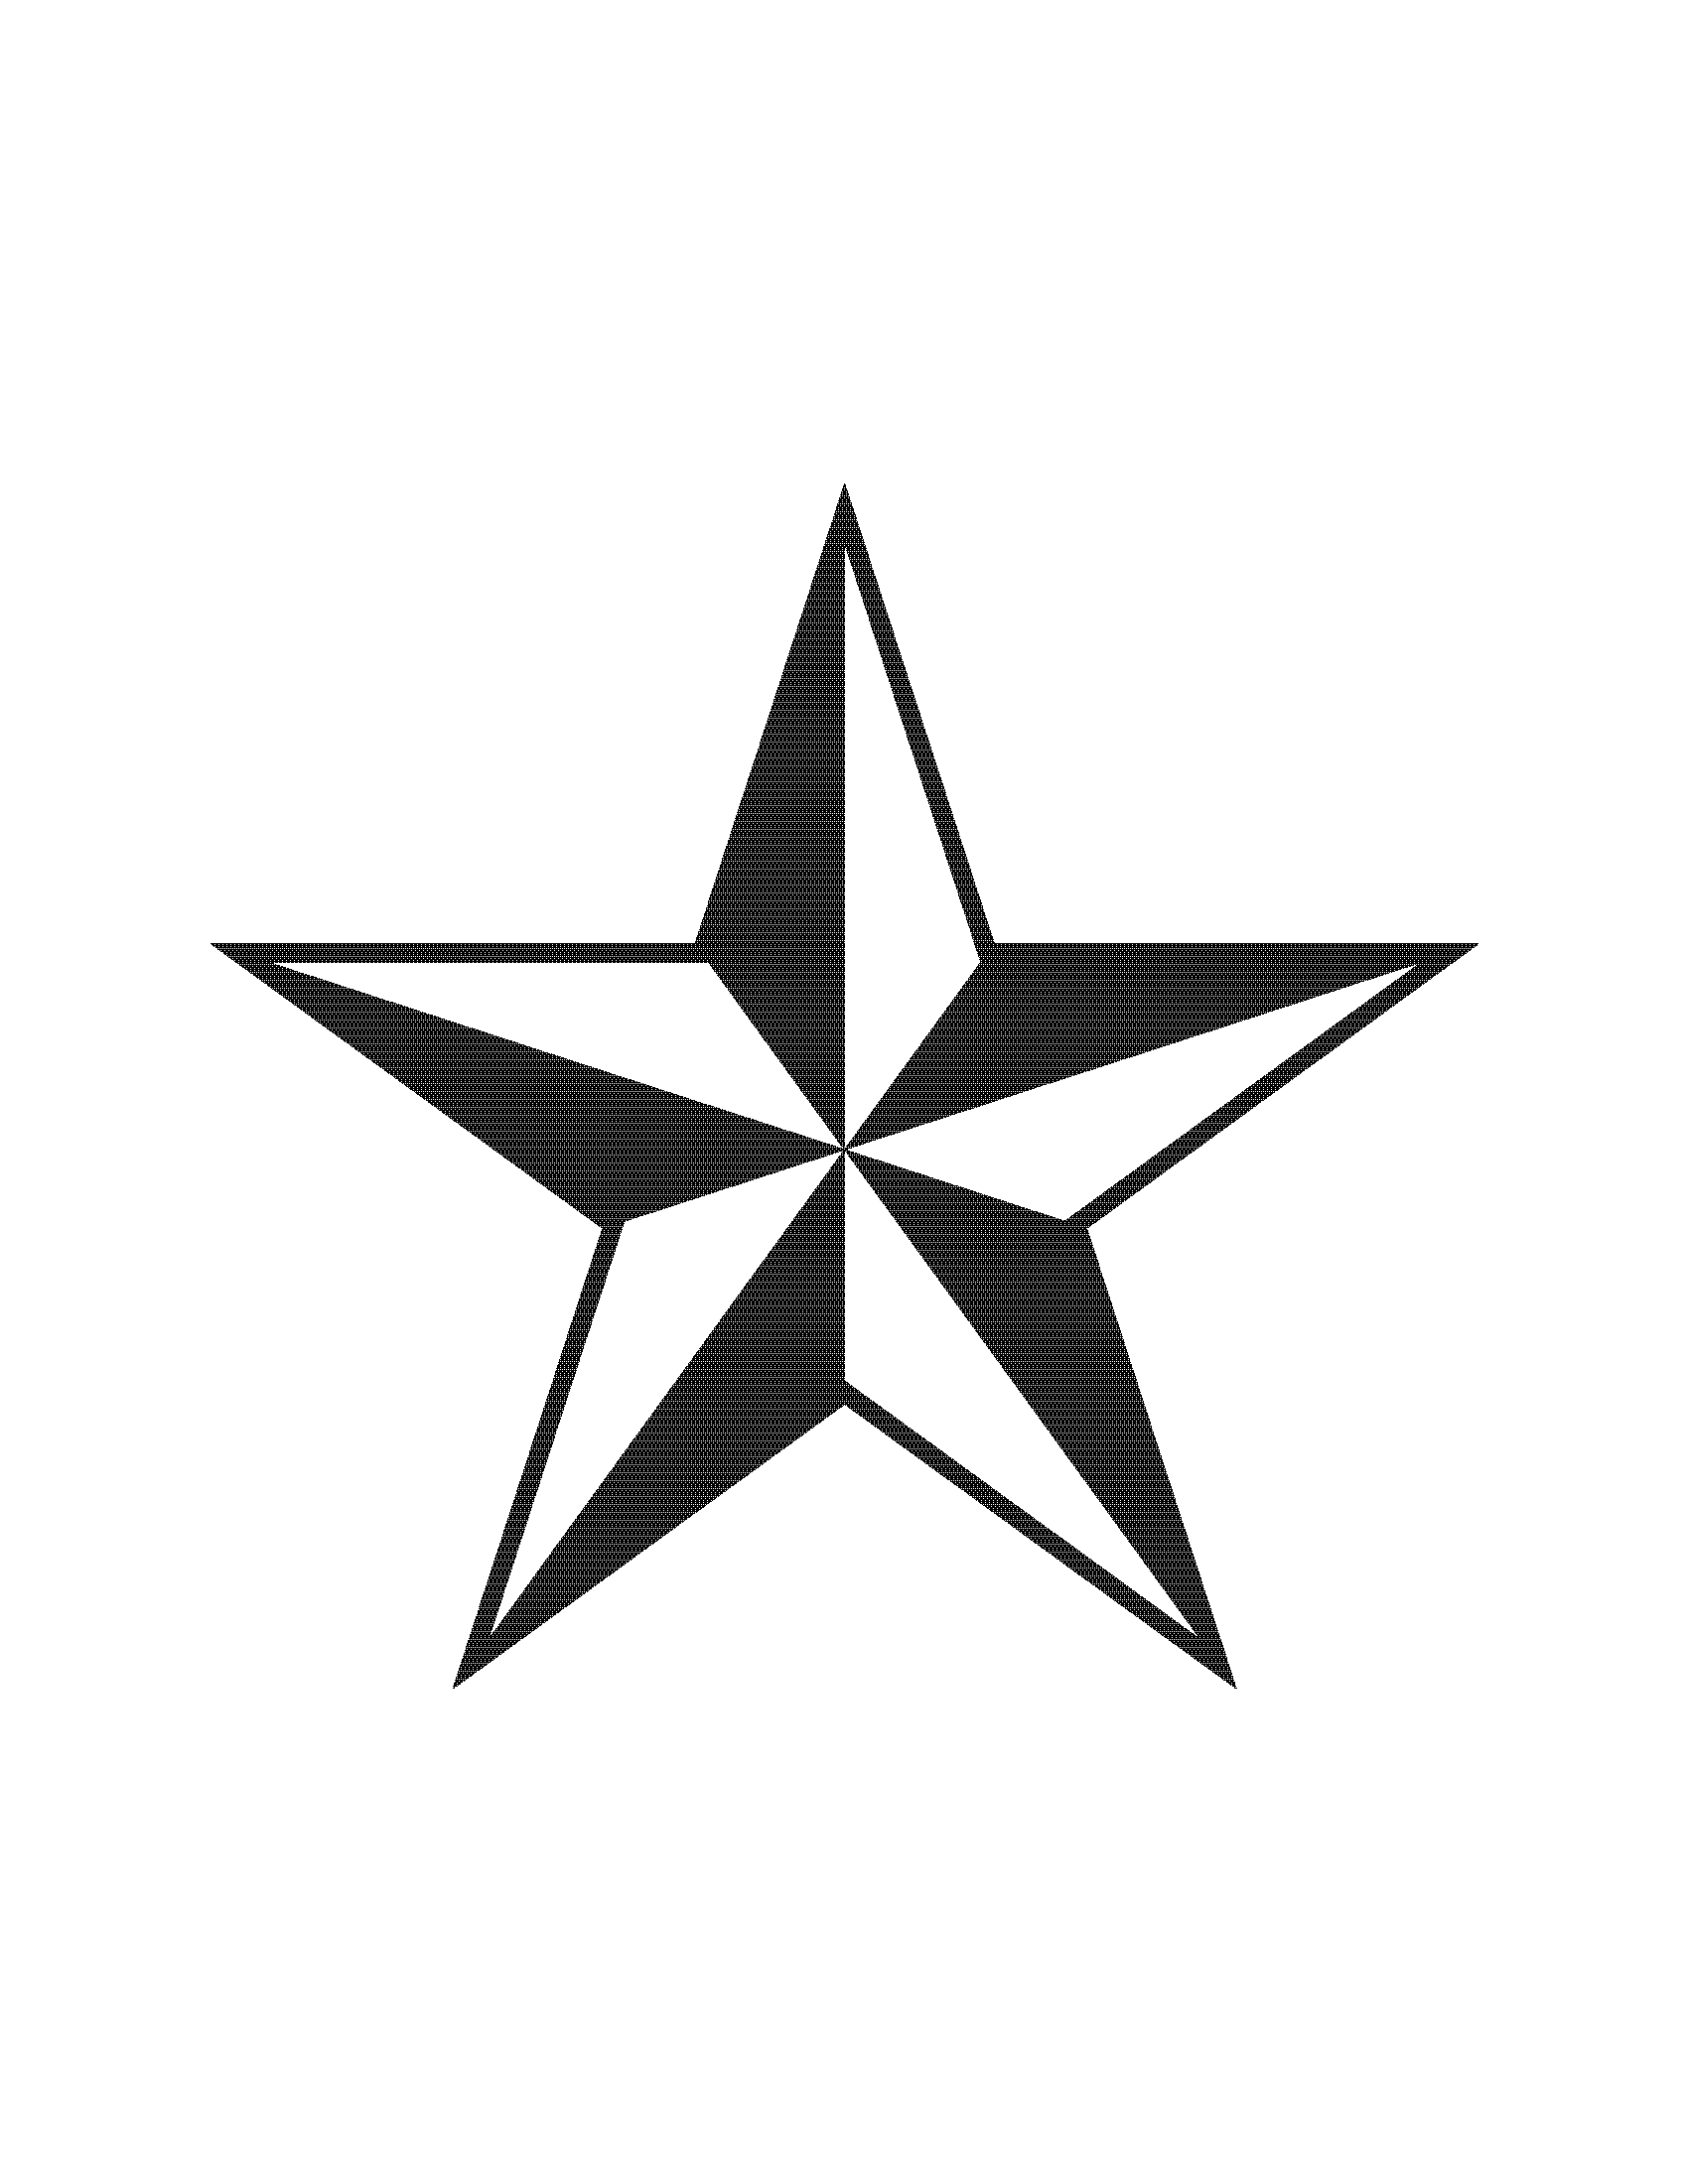 Star black and white shooting star clip art black and white free ...